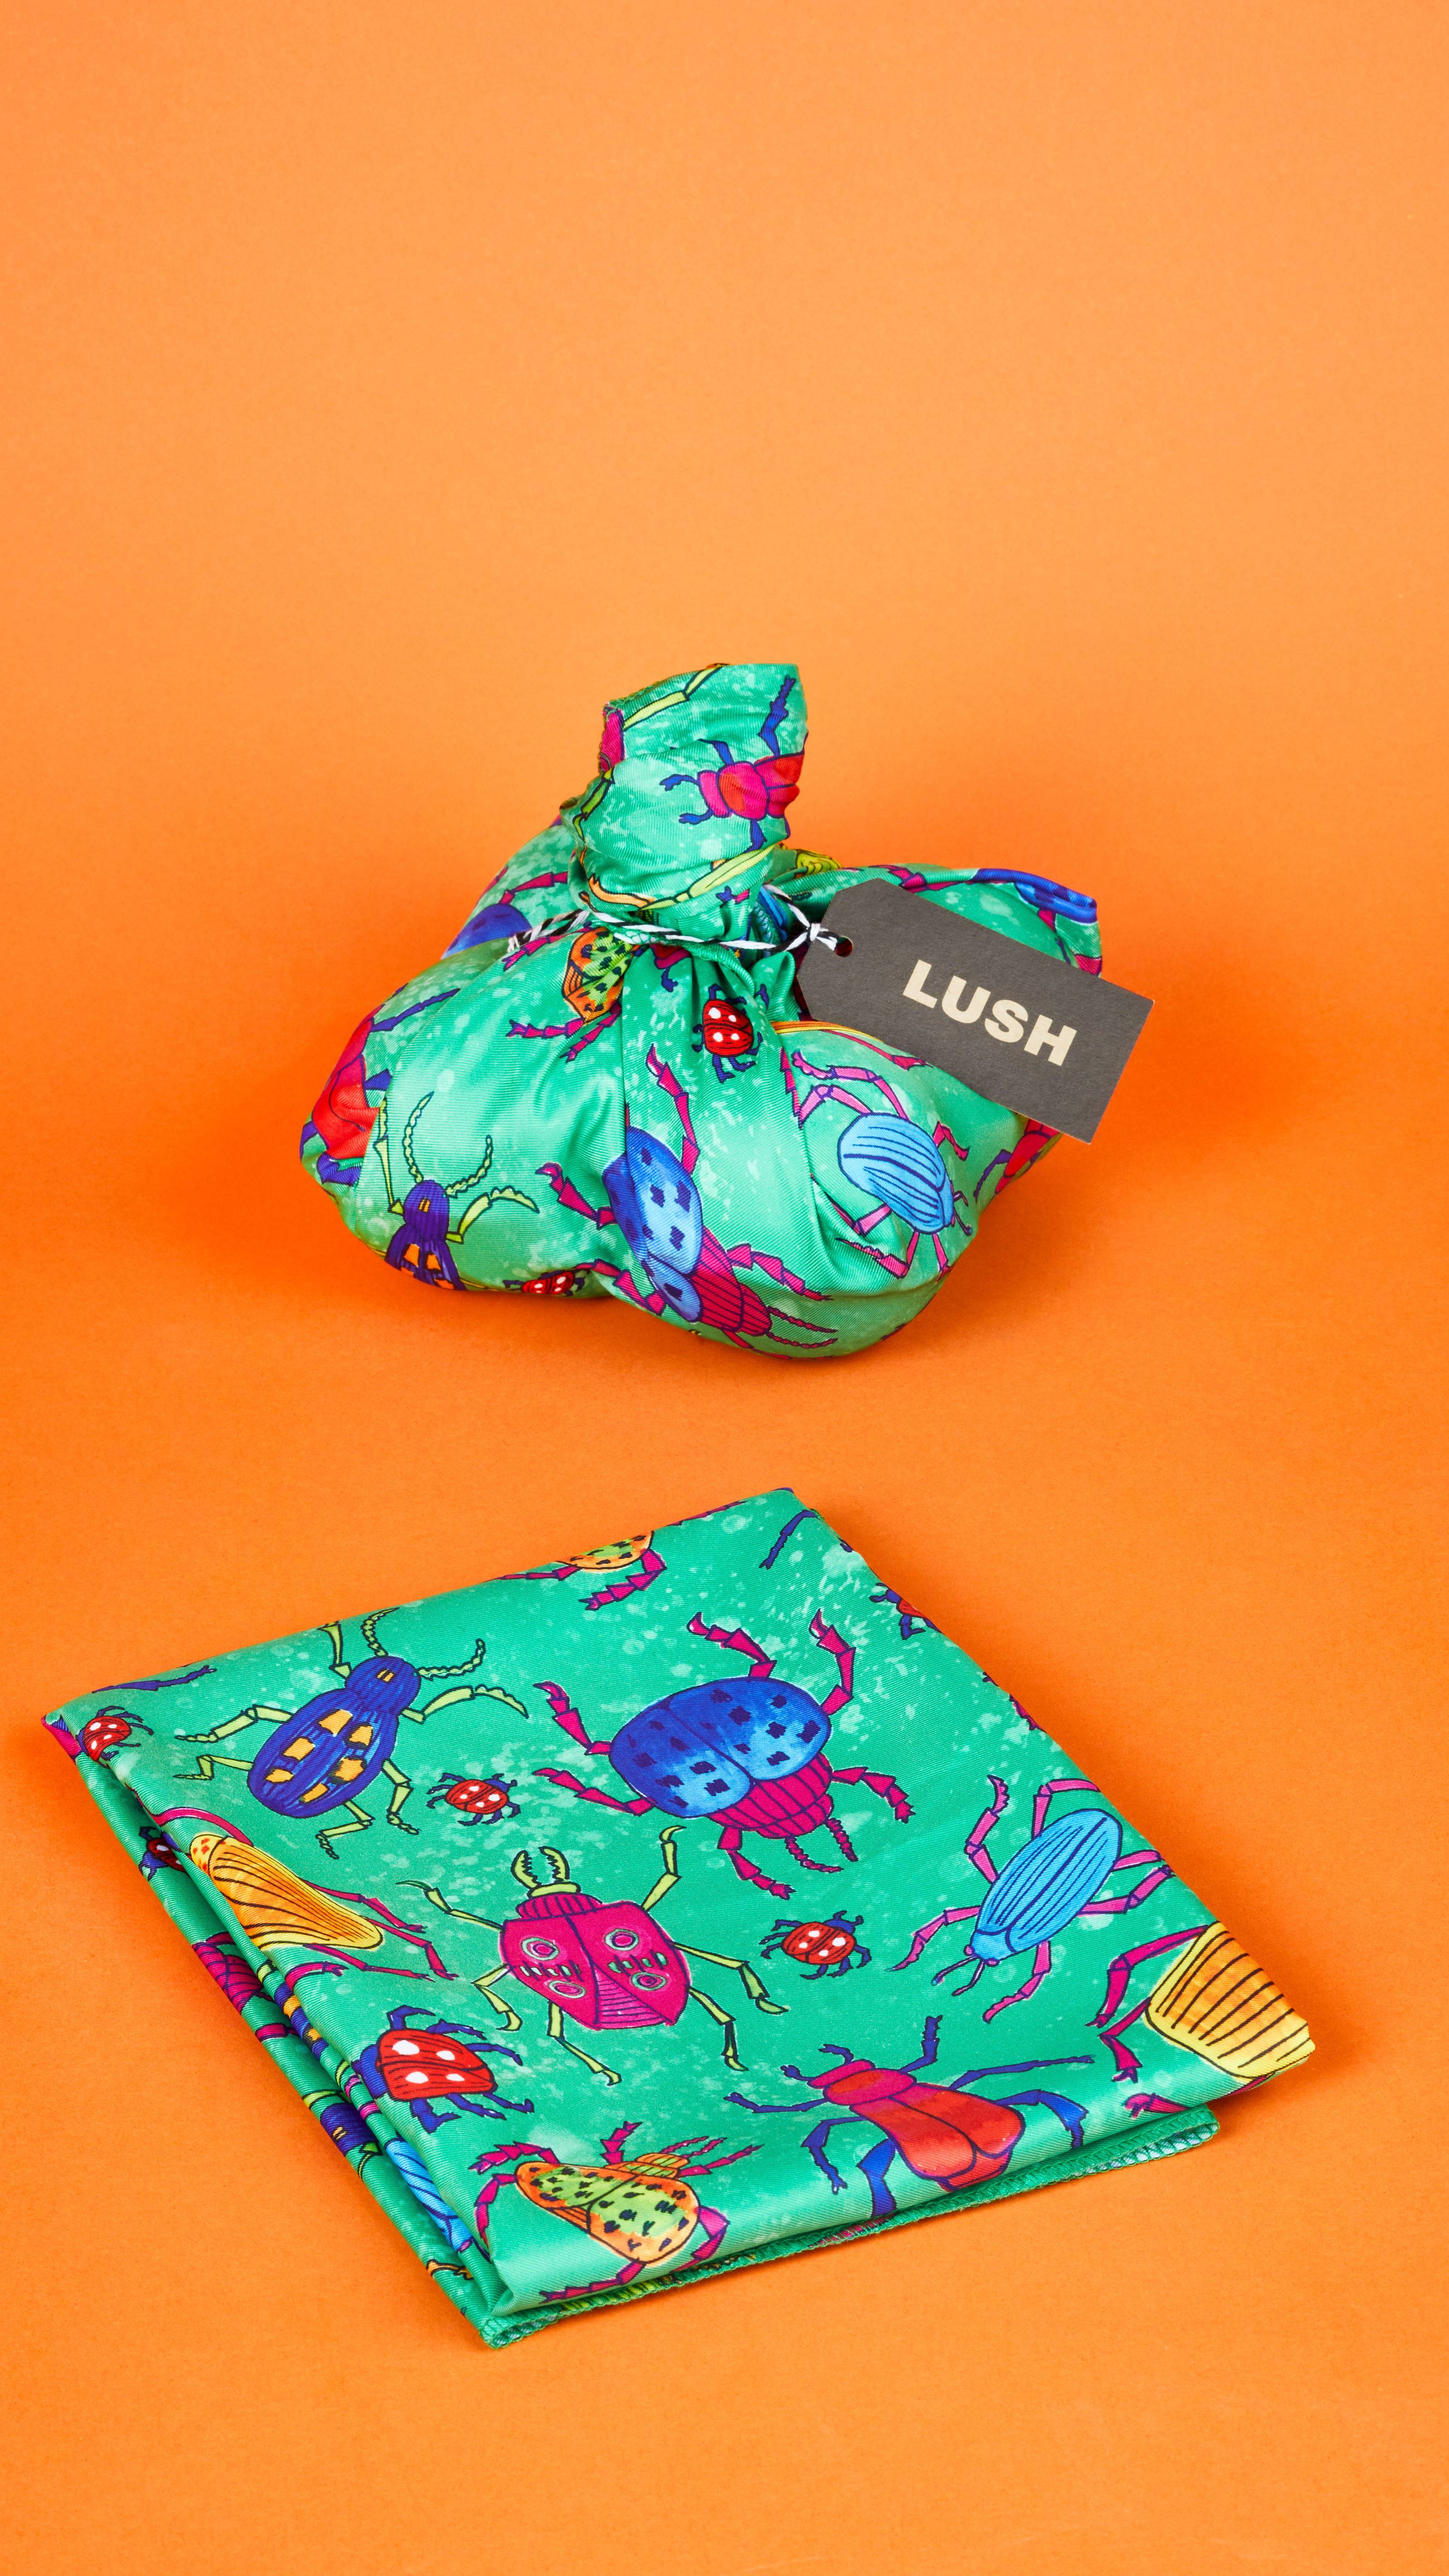 Bugs Knot Wrap displayed two different ways, folded and holding a gift, in front of a bright orange background.